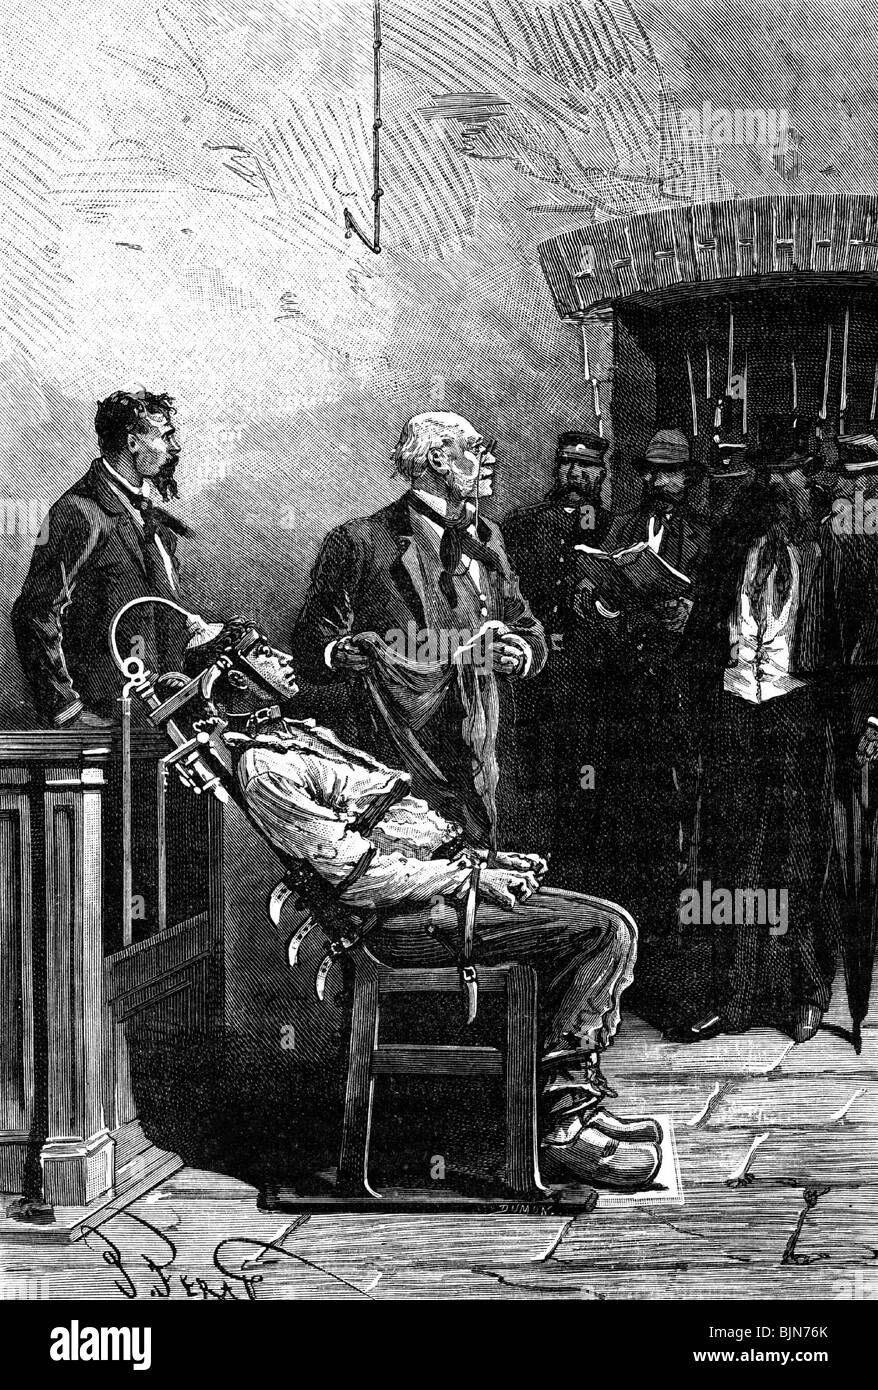 justice, penitentiary system, electric chair, execution, France, wood engraving, late 19th century, historic, historical, electricity, carrying out, death penalty, capital punishment, people, Stock Photo